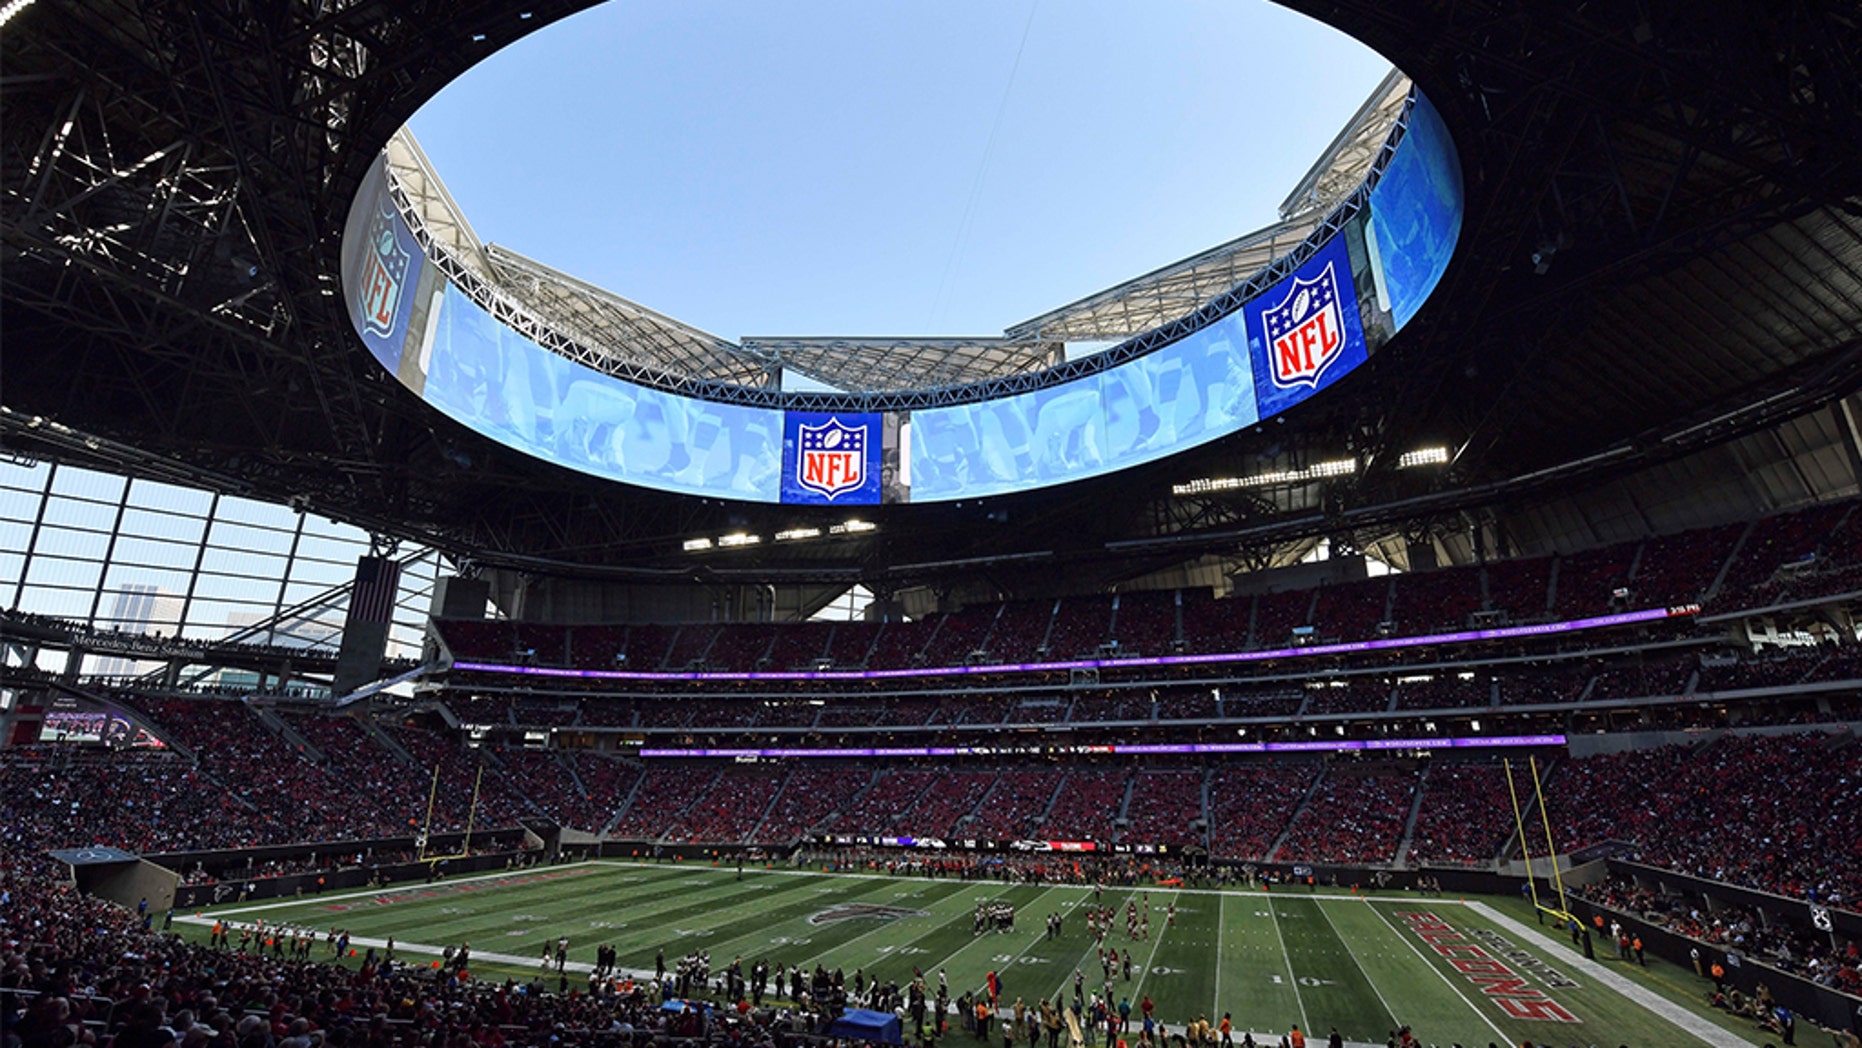 Super Bowl LIII planners in Atlanta: This shutdown means ‘uncharted territory’